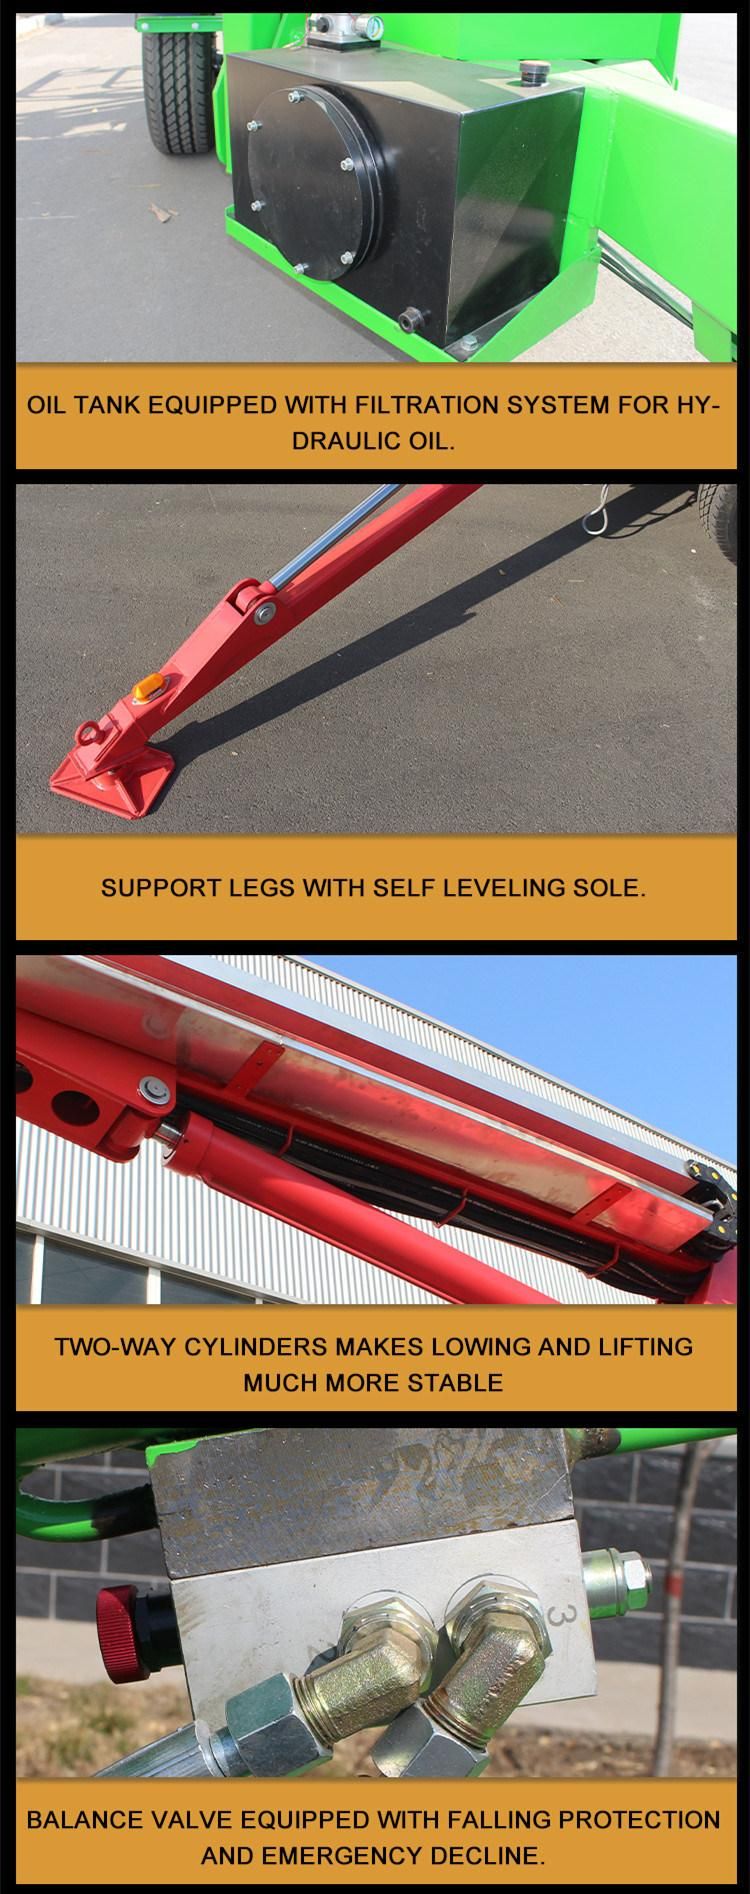 Best Price China Portable Mobile Articulating Towable Trailer Boom Lift 10-22m